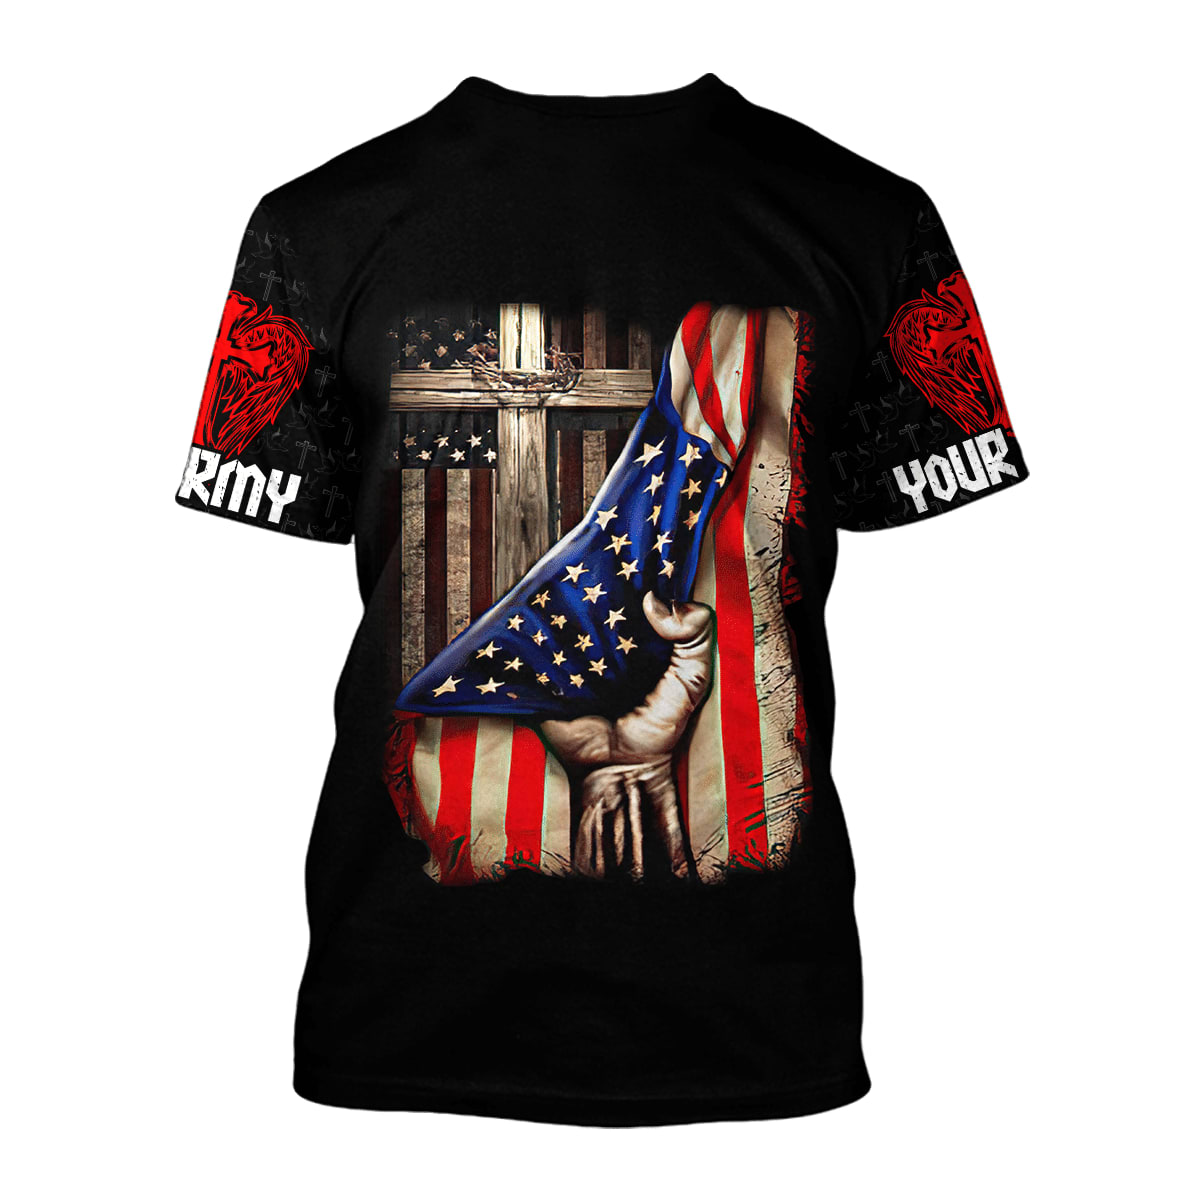 God Bless US Army Independence Day Customized Shirt - Christian 3d Shirts For Men Women - Custom Name T-Shirt